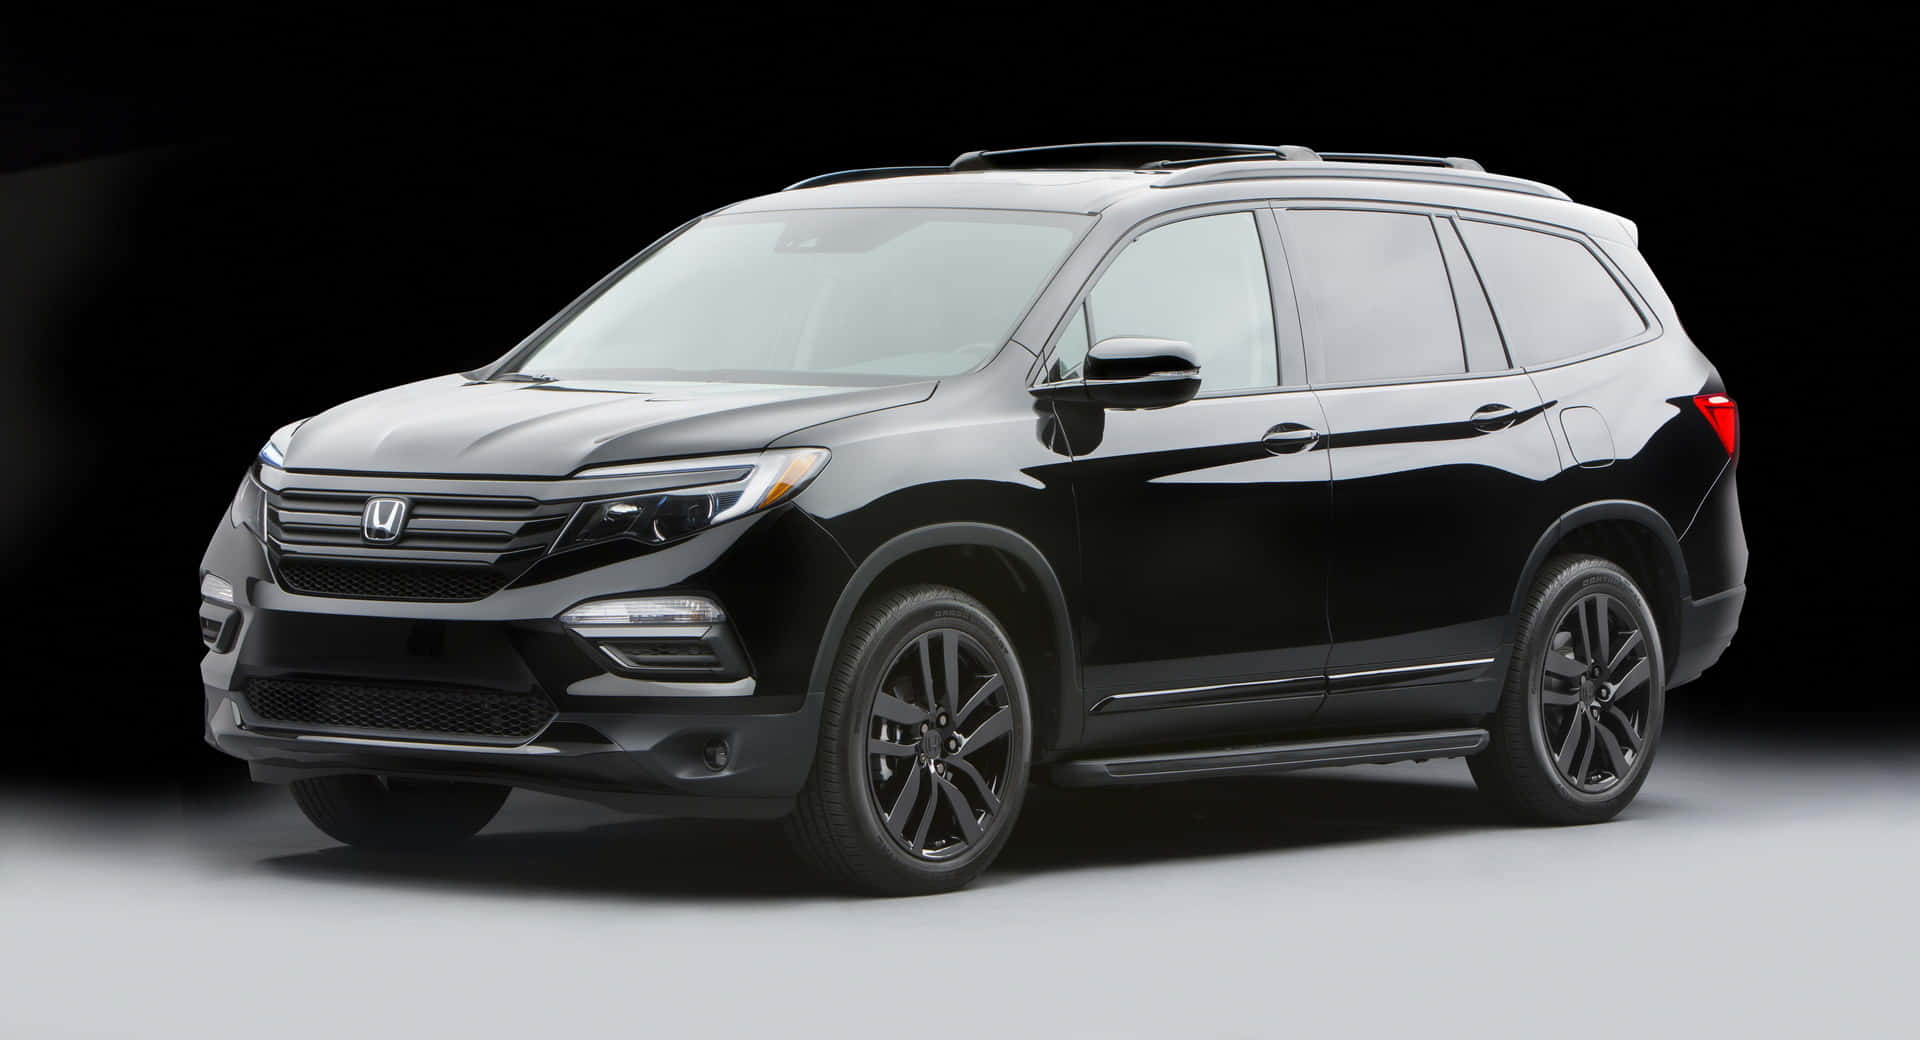 Sleek and Functional Honda Pilot SUV on a Picturesque Highway Wallpaper